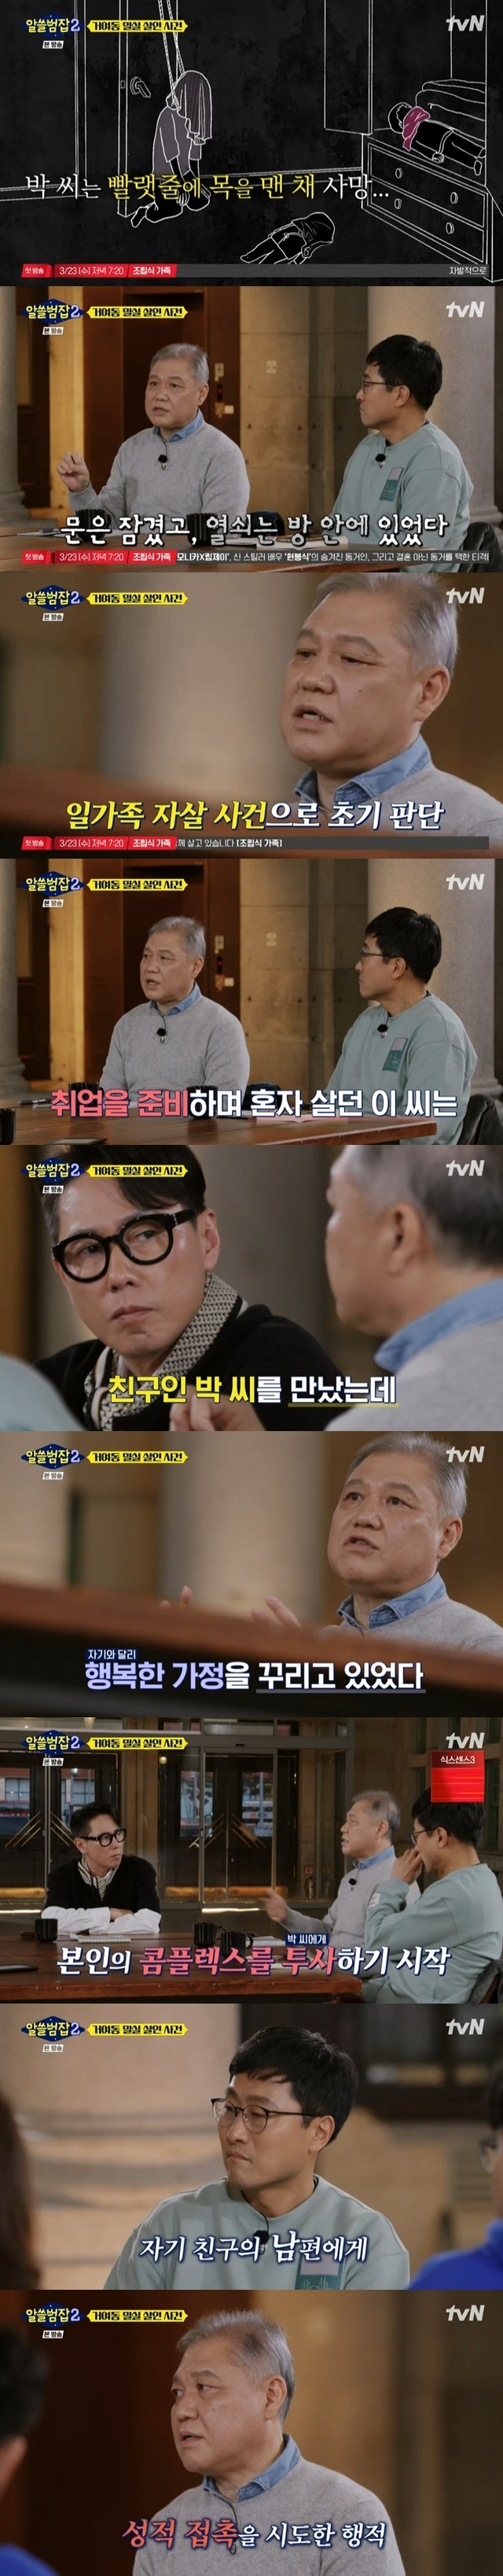 The quickness of the Geoyeo-dong secret room Murder case, which was jealous of alumni, added to the eerieness.On March 13, TVN ALL-BUM 2, a Crime Job Dictionary that is useful to know, looked back at the Geoyo-dong secret room Murder case.On this day, Kwon Il-yong profiler introduced the Geoyeo-dong family Murder case, known as the secret room Murder case.In December 2003, a 31-year-old housewife, a three-year-old son, and a 10-month-old daughter were found dead in an apartment in Geoyeo-dong, Songpa-gu.In the small room, a three-year-old son died in a small room, surrounded by a cloth, and a ten-month-old daughter was covered with a plastic bag.The door was locked, the key was found in a small room with a bag, and it became a secret room Murder case.Police initially judged that Park Killed and died because no footprints were found.However, her husband stated that there was no conflict in her life, and it was Parks high school alumni Lee who the police found through CCTV investigation.At the time of the estimated death of Park, there was a trace of Lee coming and going in an elevator. Lee took a sleeve down to cover the back of his hand, and there was a scratch on the back of his hand.As a result of the seizure of Lees house, a plan was found to plan how to kill in the diary.I tried to kill a few times, but I did not have a chance, and I was also told that I would not pass this year.Lee and Park, the victim, were reunited a few months ago by chance. Lee lives hard after high school, and Park has a happy family.Park often called Lee to give him goodwill, but Lee began to control his complex, controlled his house, and arranged his husbands underwear in his own way.Lee became acquainted with Parks children, pretending to be hide-and-seek on the day of the crime, and after killing from son, he blindfolded Park and found him, and then strangled him with a laundry line.Park was holding her second daughter, so she could not resist. She did not let her daughter go to the end, so she bruised her hand only.After Parks death, Lee put vinyl on his daughter and Killed, and threw a bag with a key.